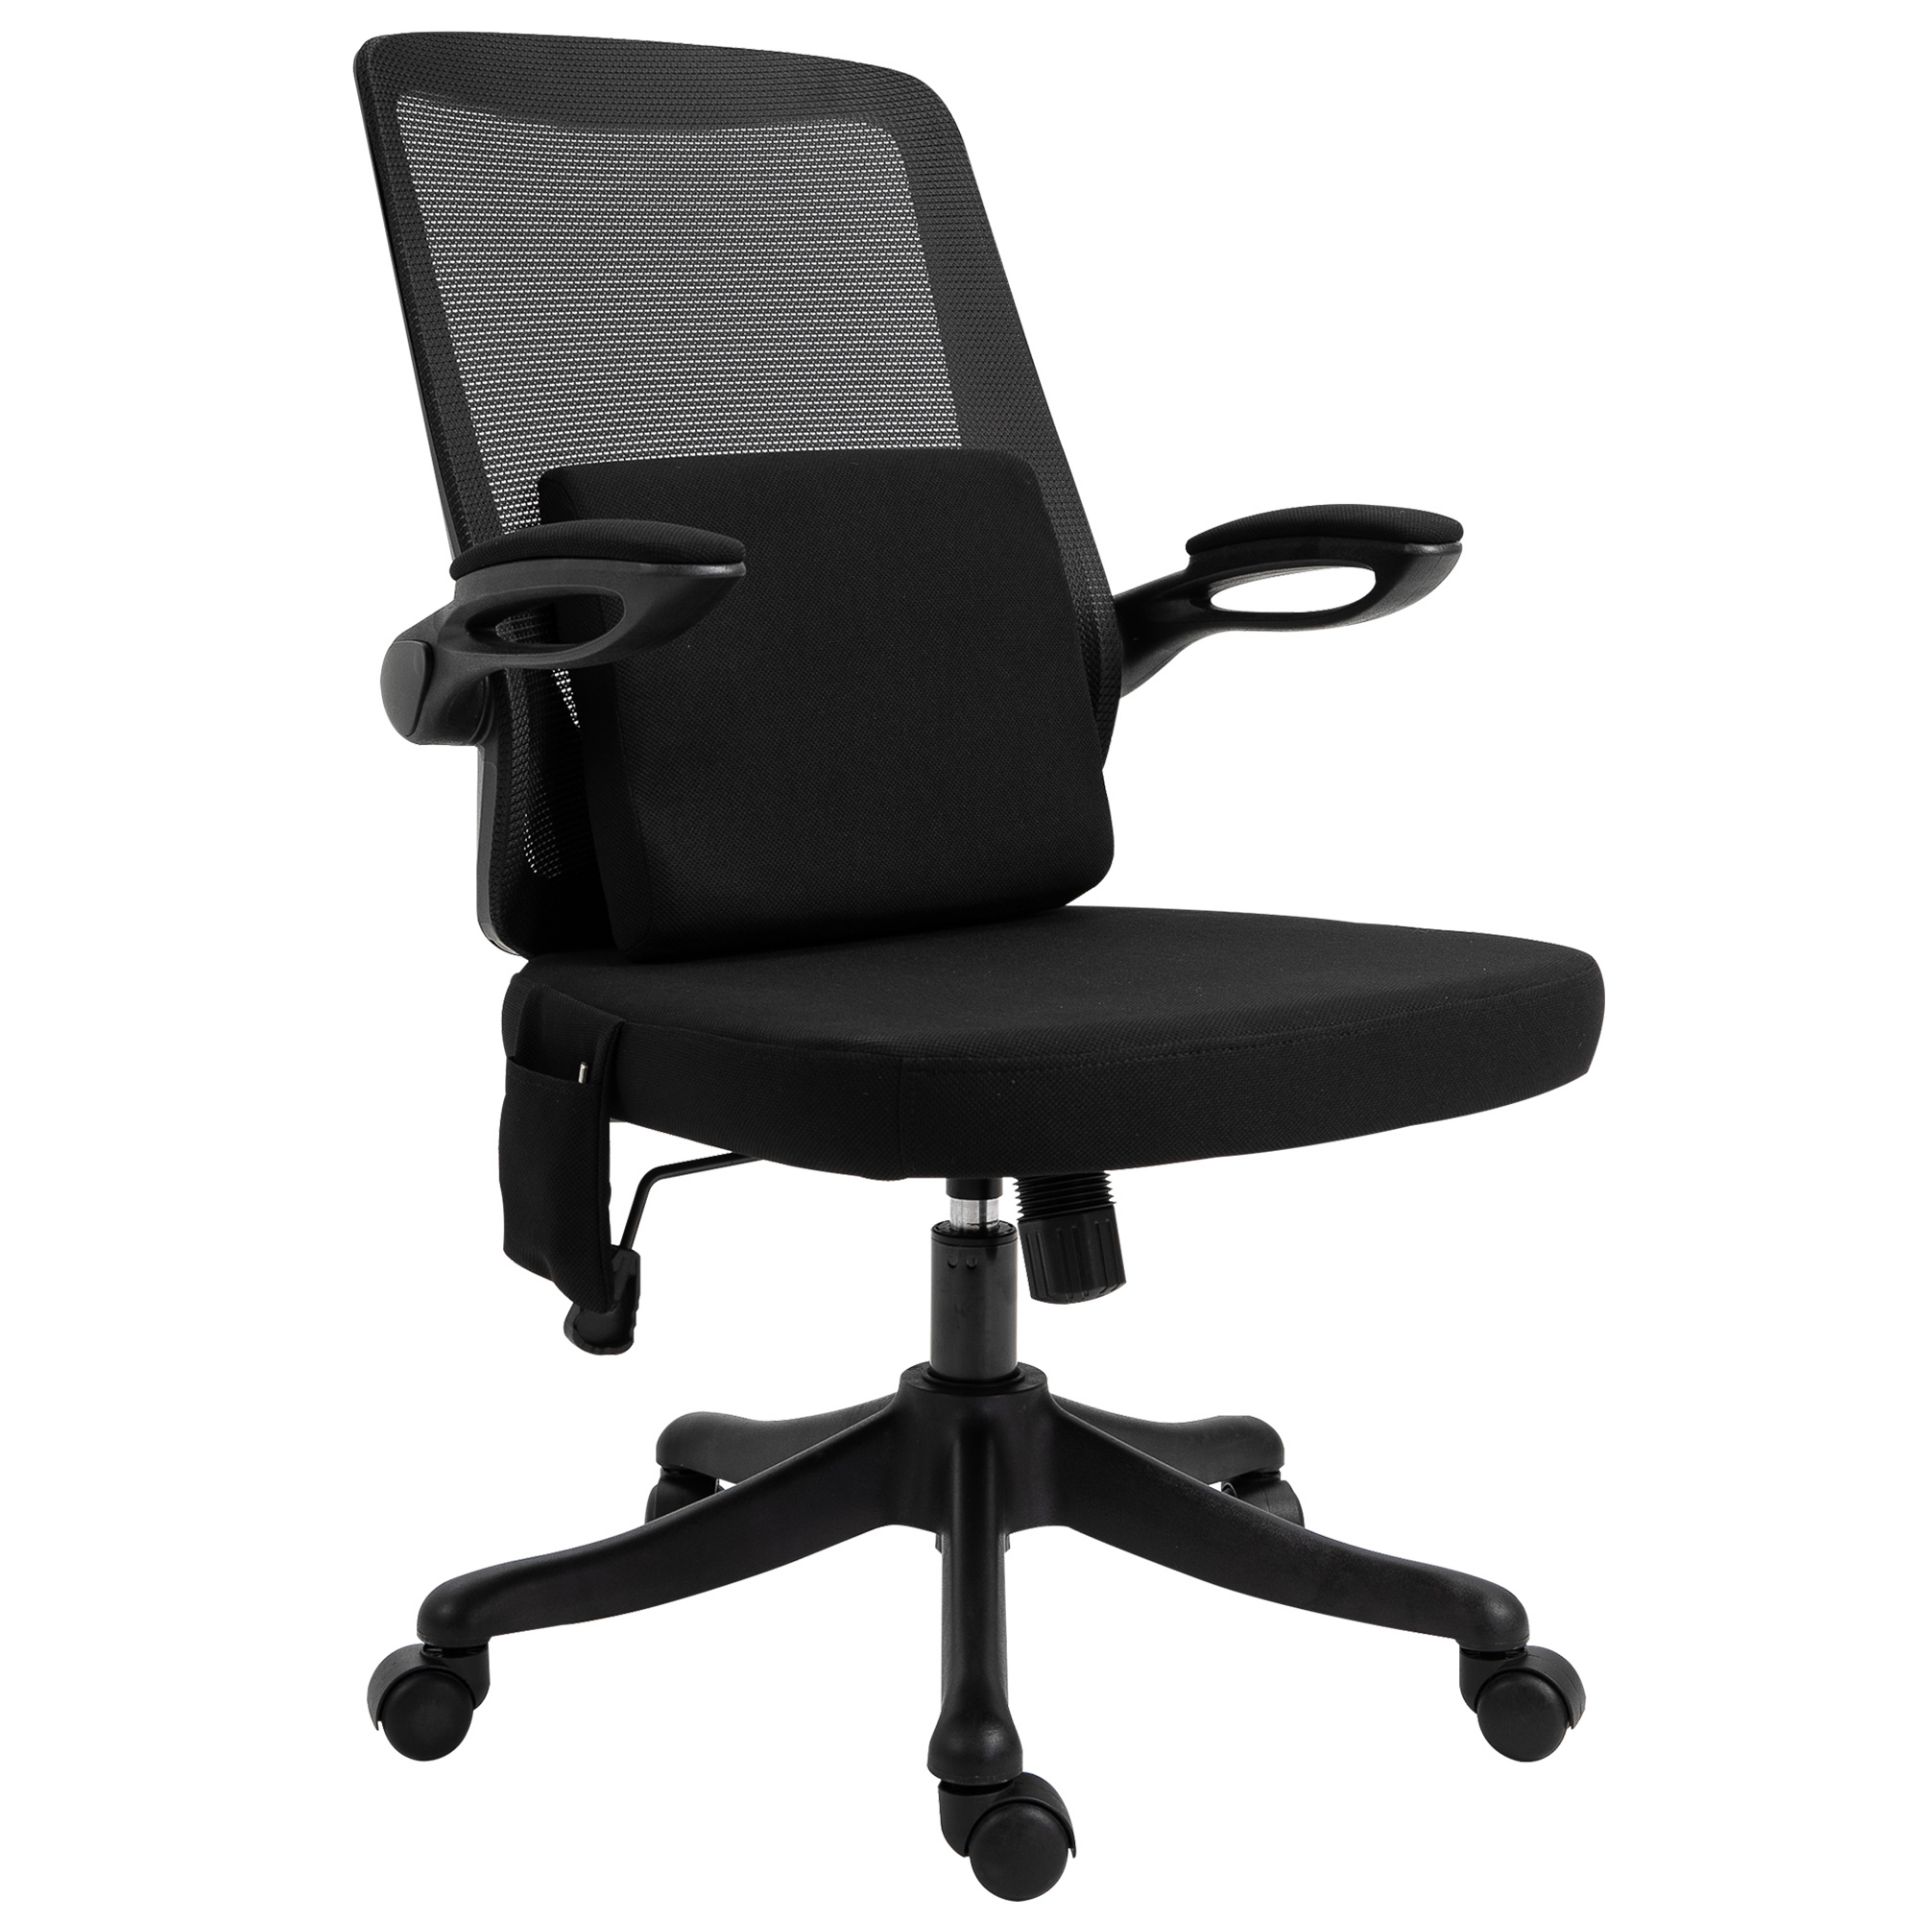 | 1 x | VINSETTO OFFICE CHAIR 2-POINT MASSAGE EXECUTIVE ERGONOMIC USB POWER MESH COVER W/ WHEEL |